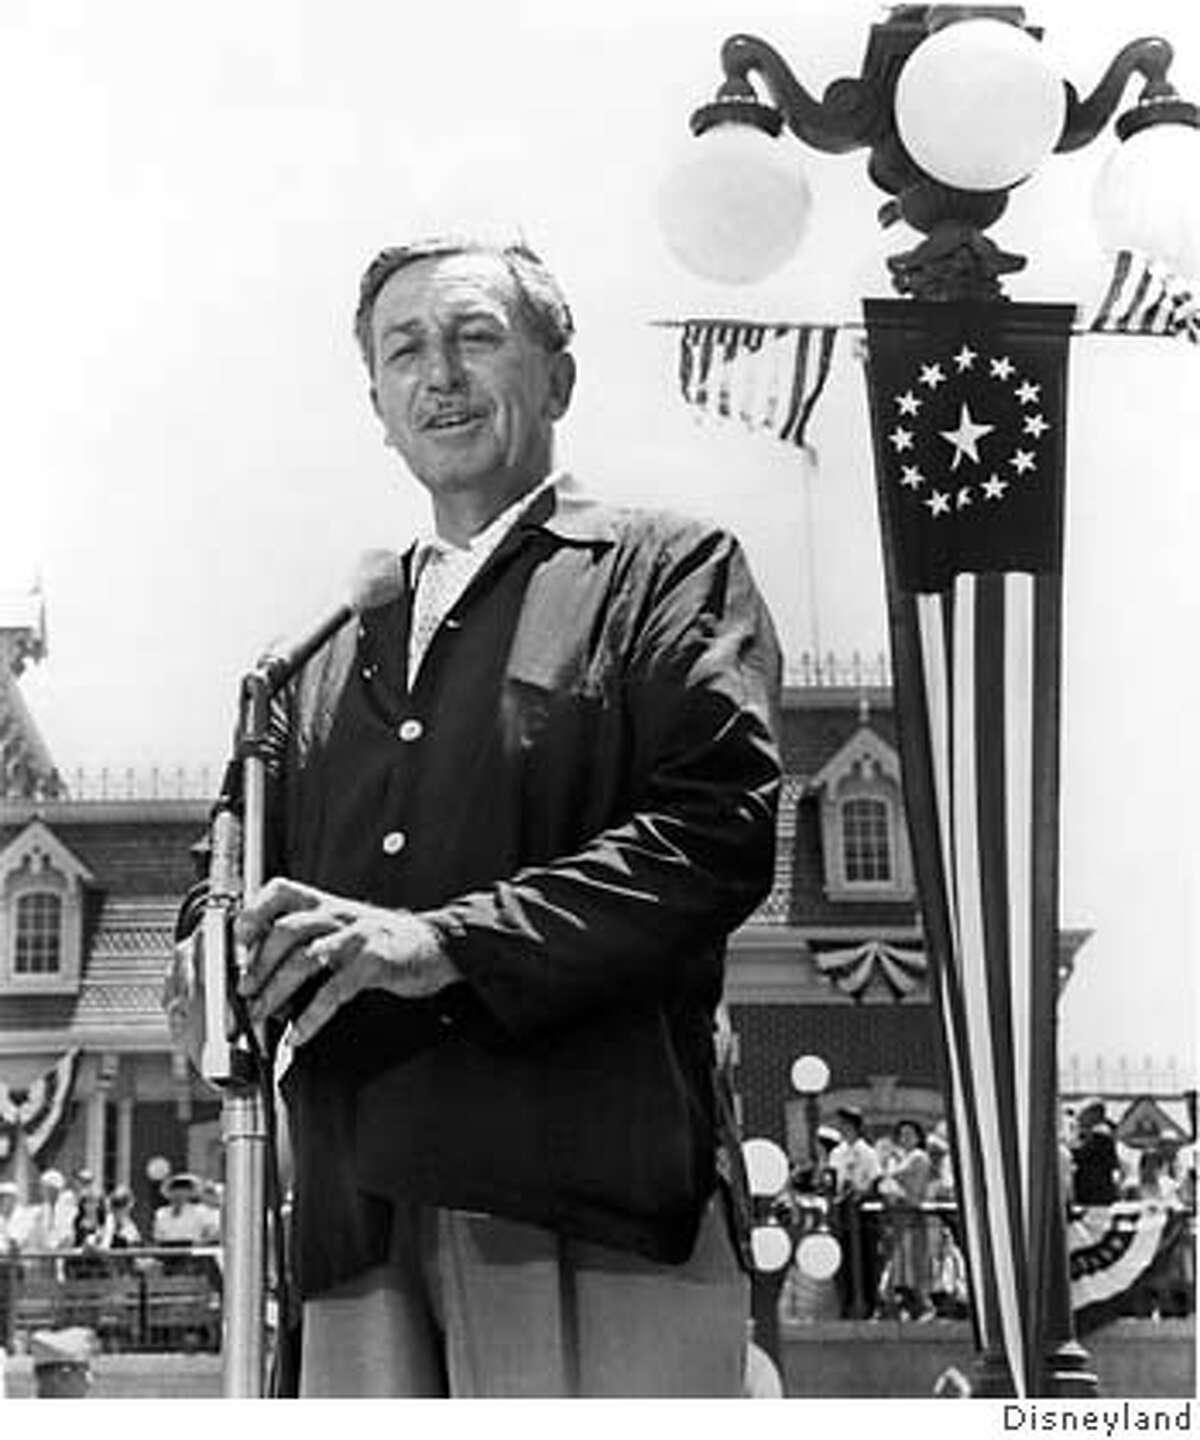 File photo of Walt Disney shown during the opening of Disneyland July 17, 1955 in Anaheim, California. On May 5, 2005, the Disneyland Resort in California launches the "Happiest Homecoming On Earth," an 18-month commemoration of the 50th anniversary of the very first Disney theme park; Disneyland. The event is the cornerstone of a global celebration in which all 11 Disney theme parks around the world will join together for the first-time for the landmark occasion. B&W ONLY Disneyland/Handout 0